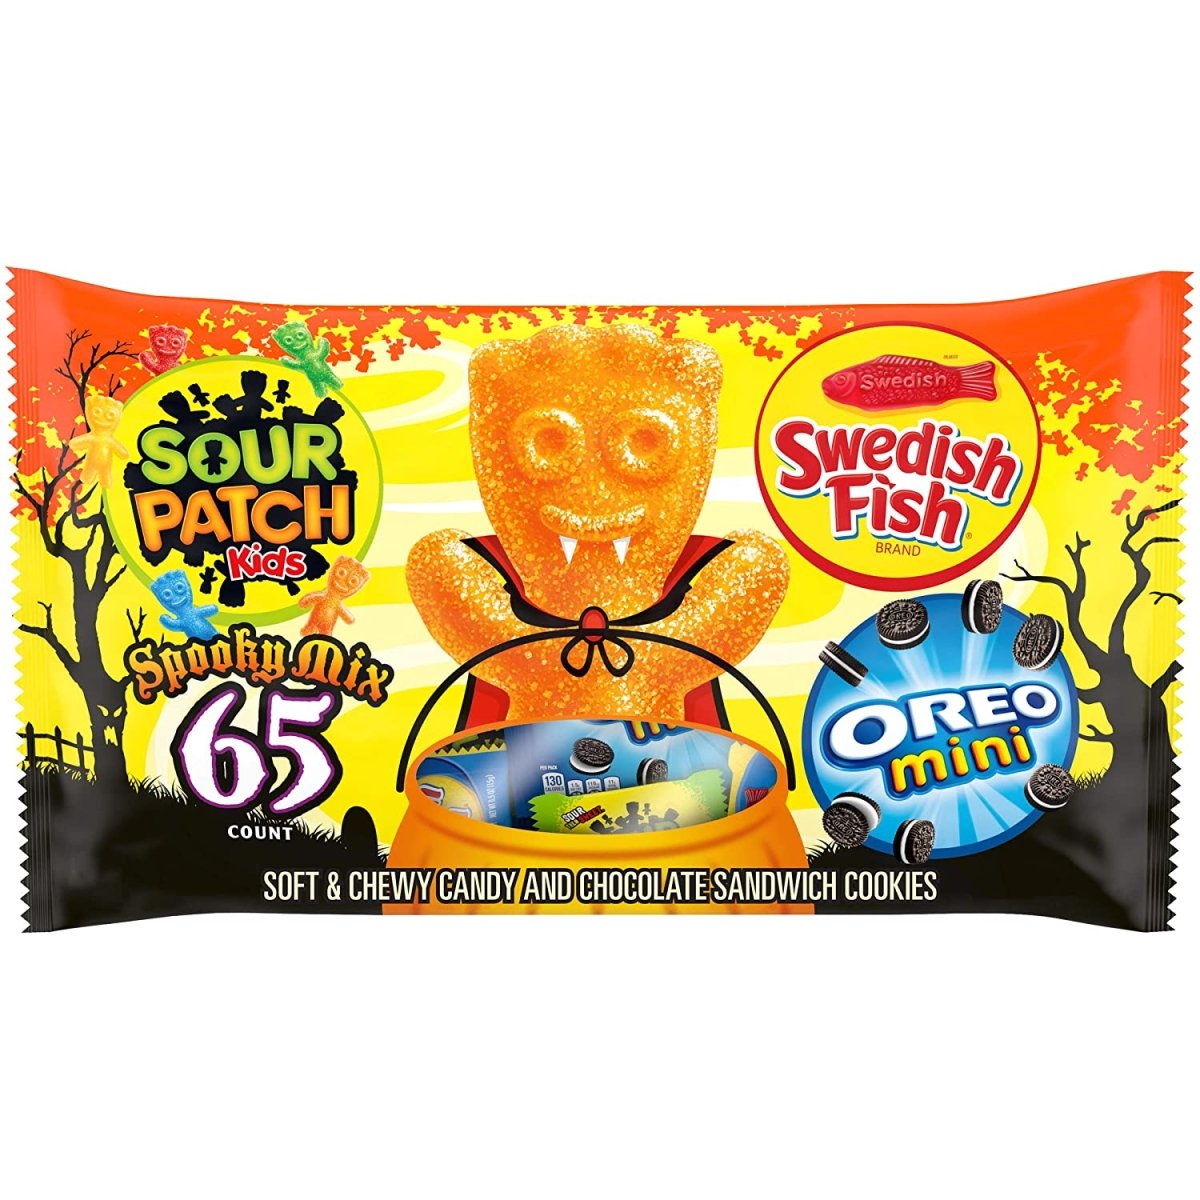 Sour Patch, Swedish Fish, Oreo Variety Pack 65 Pieces 1.1kg - Candy Mail UK